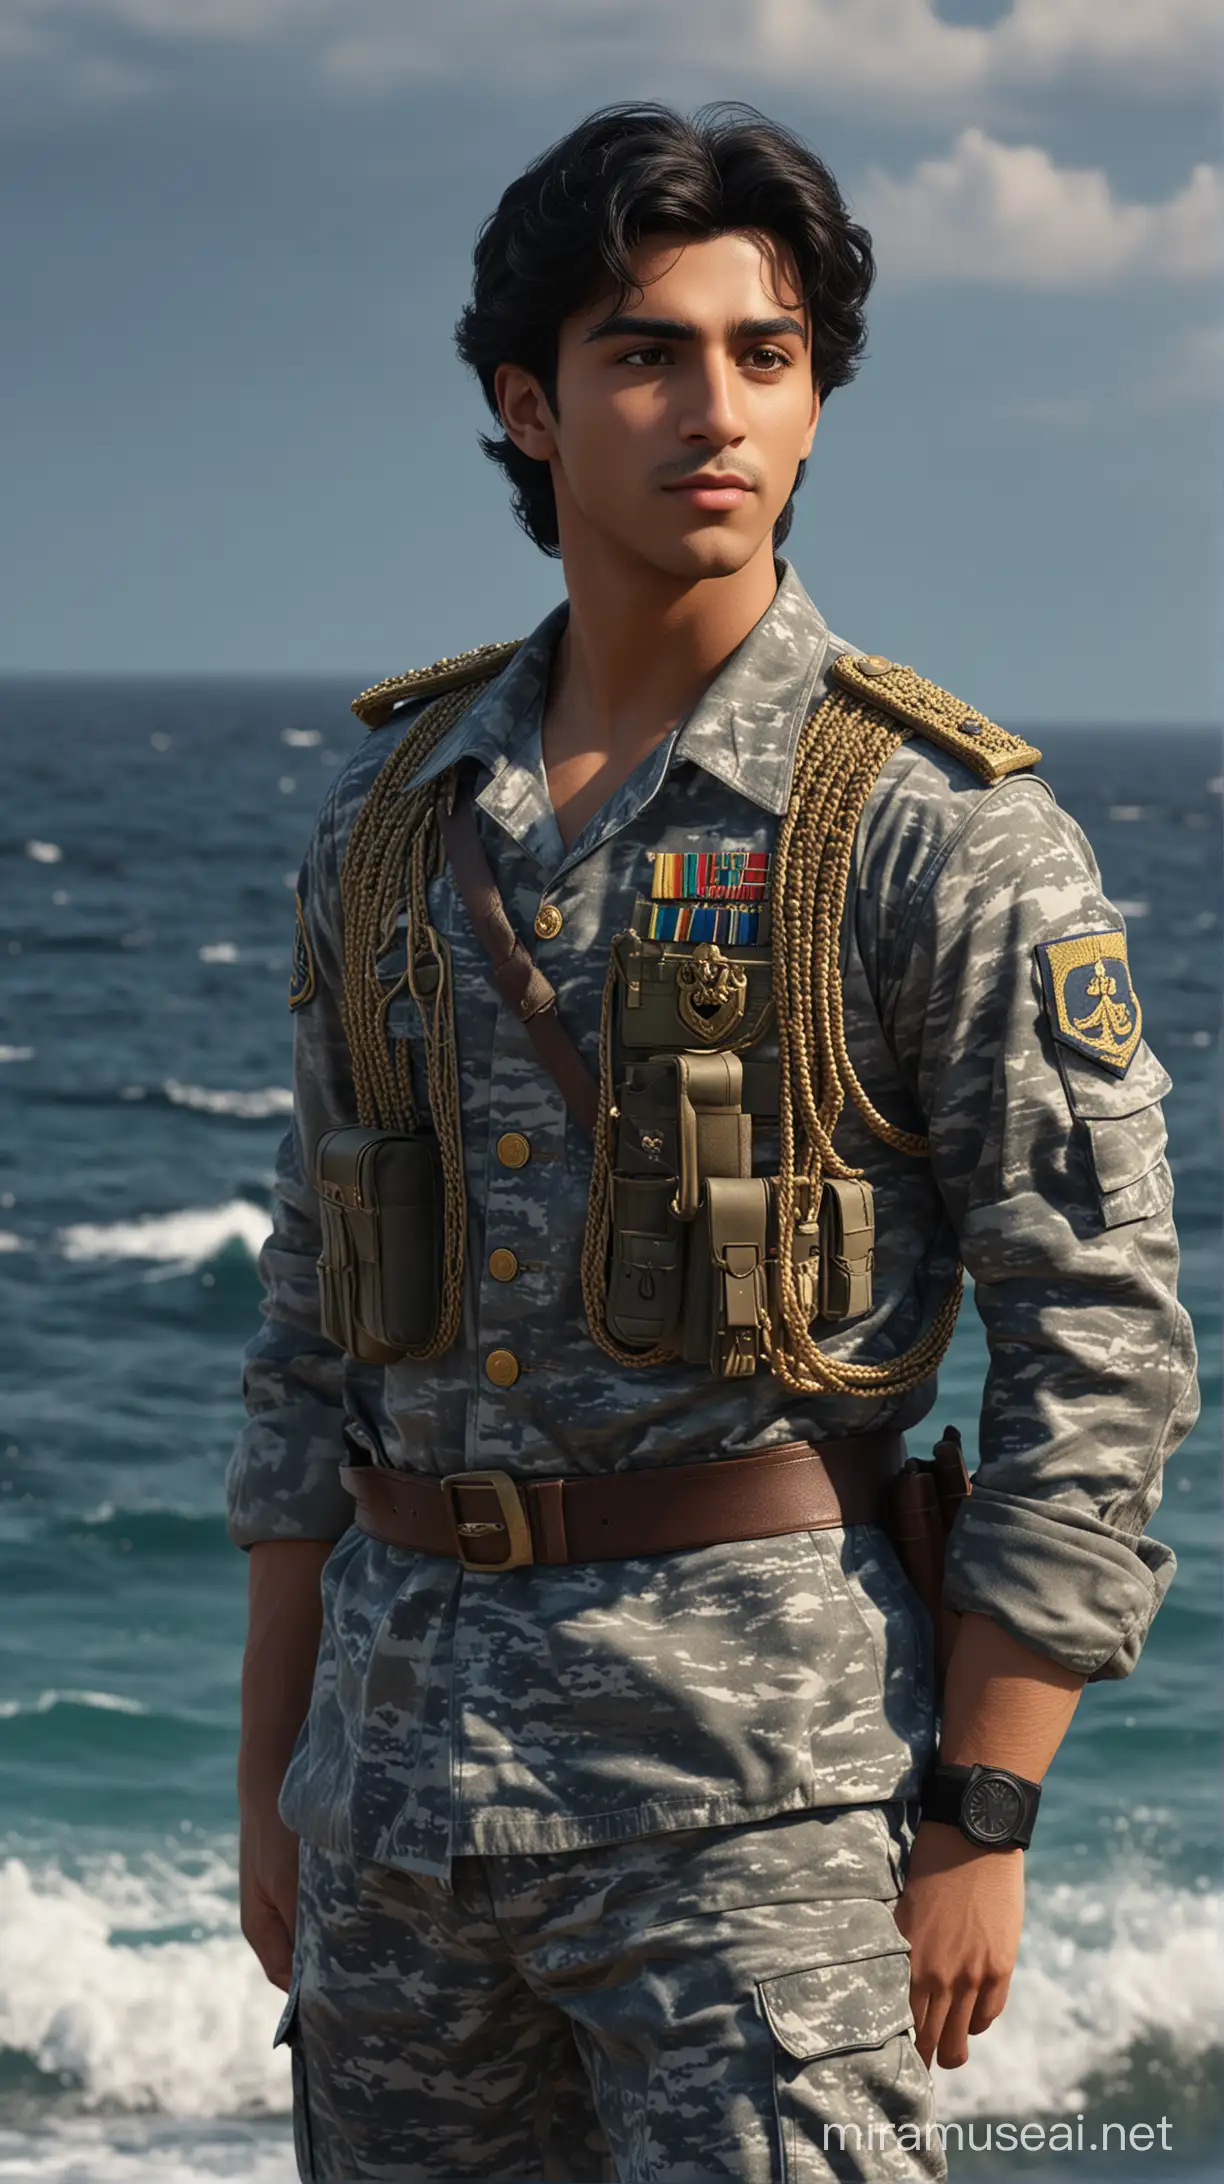 in a sea natural background  military there are disney prince Aladdin is Arabic 21-year-old with long black dark hair and black eyes and muscled and
military camouflage uniform of the navy an face beautiful 8k re solution ultra-realistic